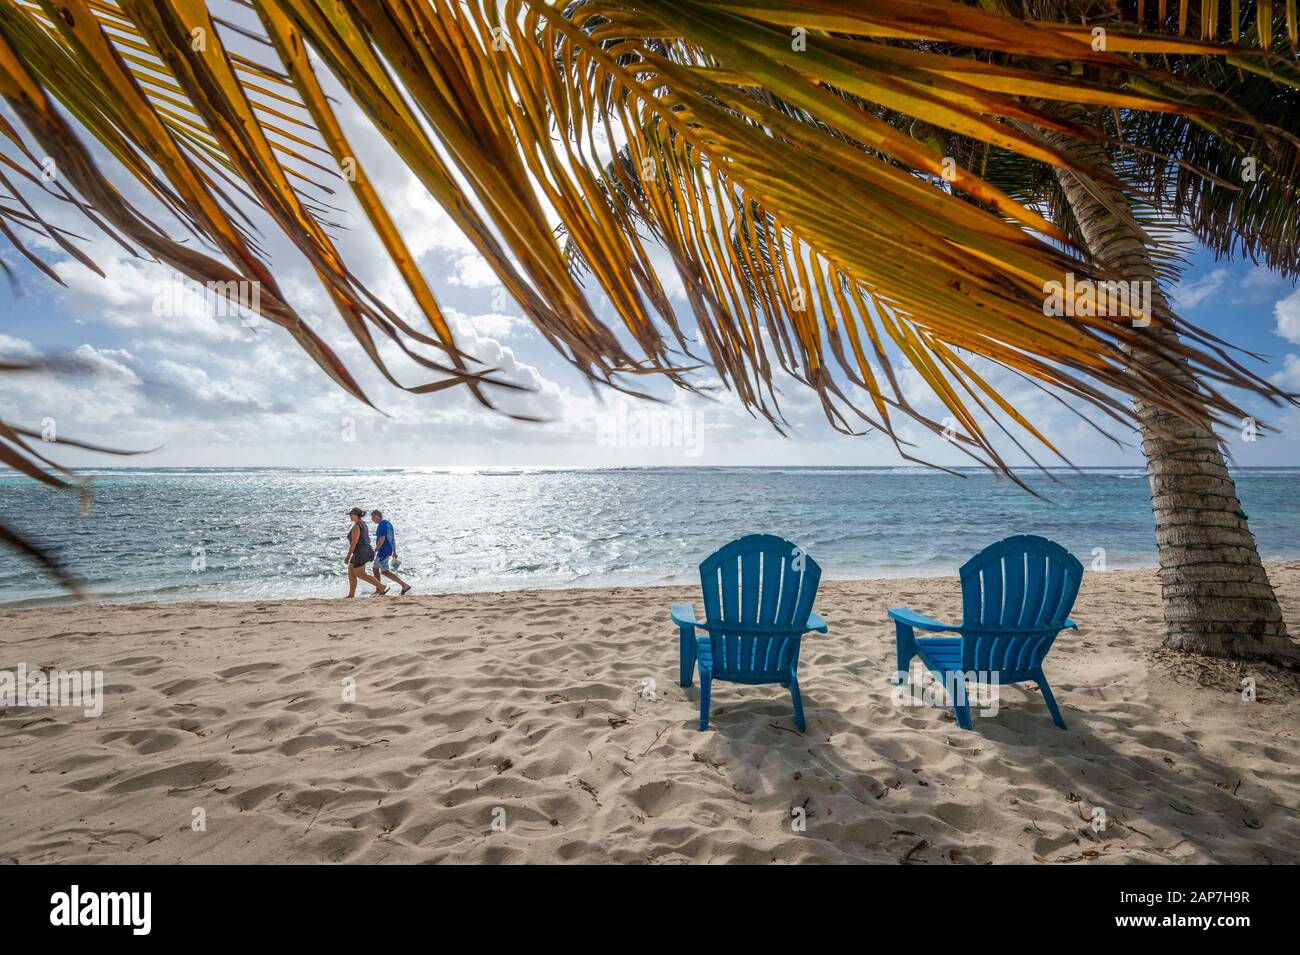 Retired American seniors walking on beach with palm trees and beach chairs Stock Photo